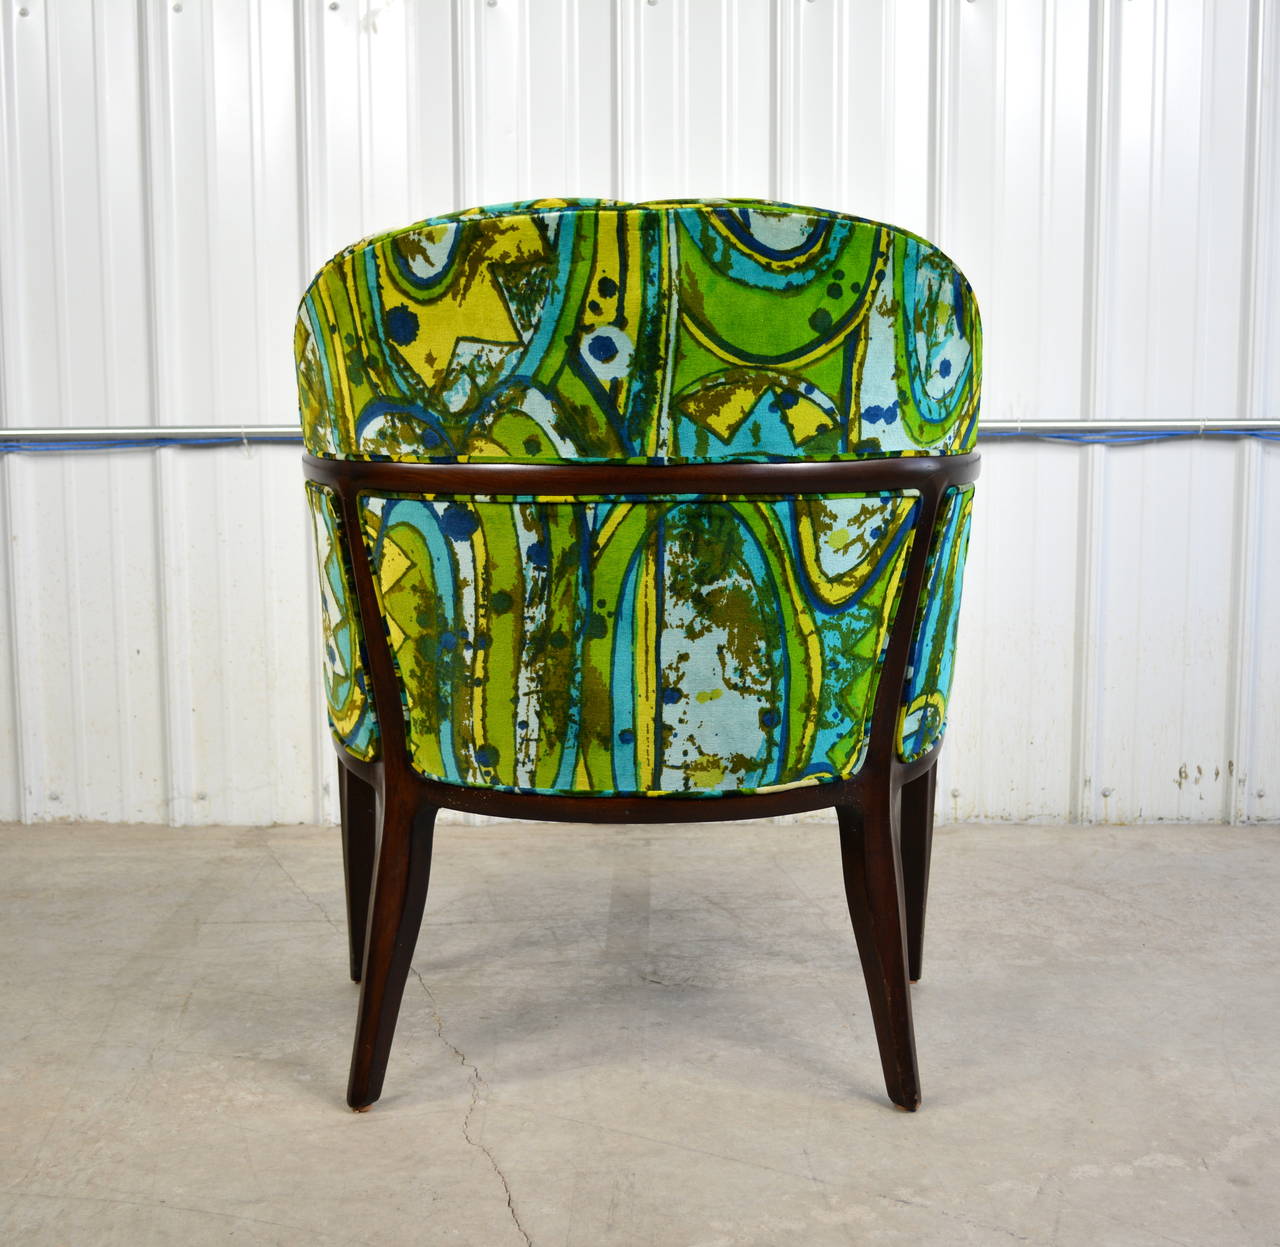 Edward Wormley Janus Lounge Chair for Dunbar In Excellent Condition For Sale In Loves Park, IL